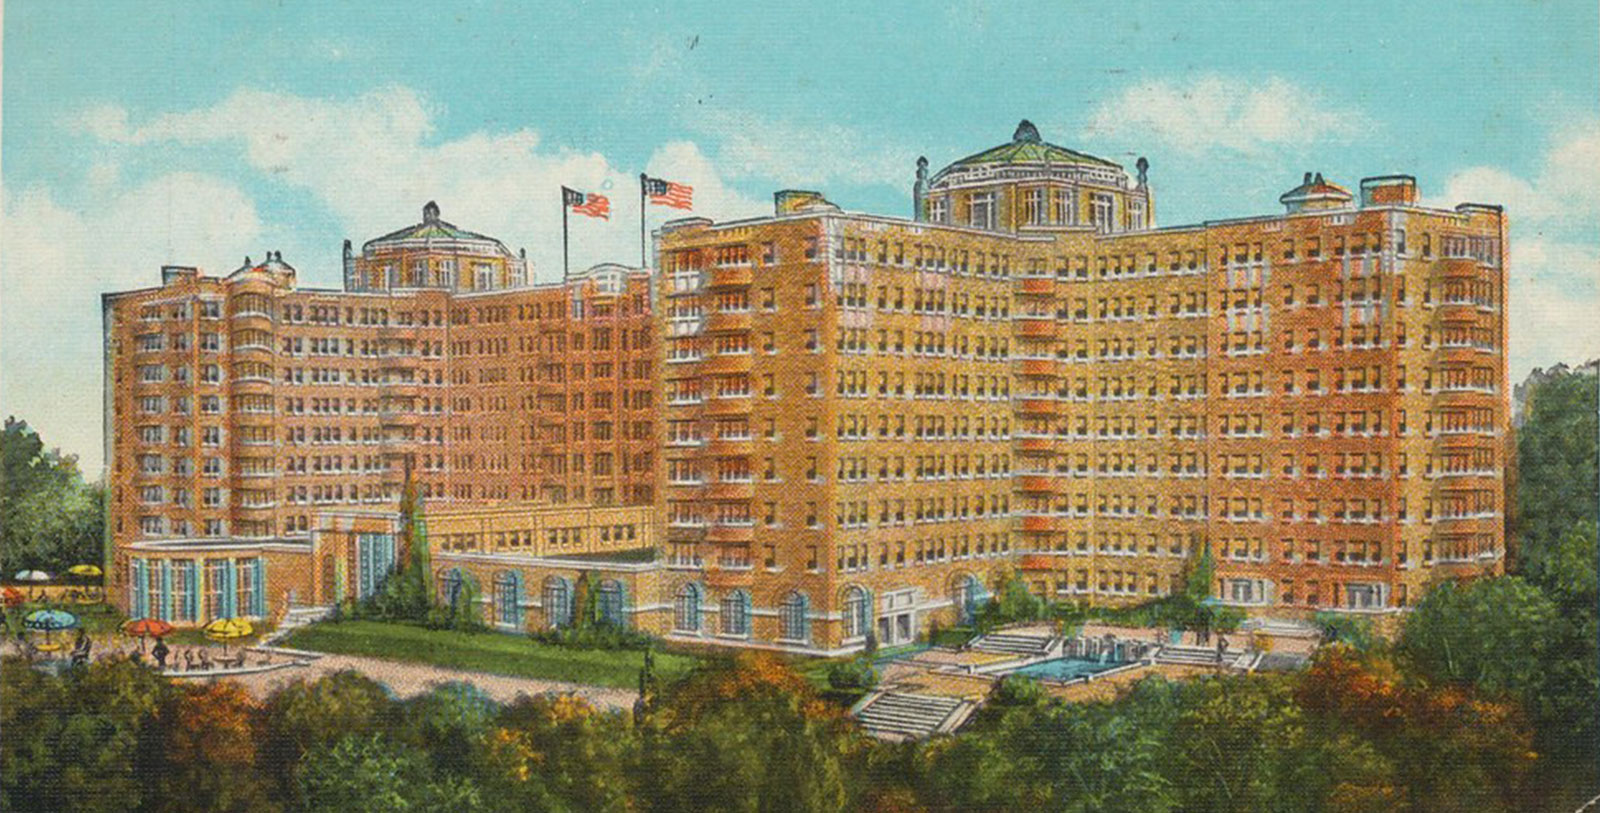 Omni Shoreham Hotel Washington DC in the 1960s from Historic Hotels of America